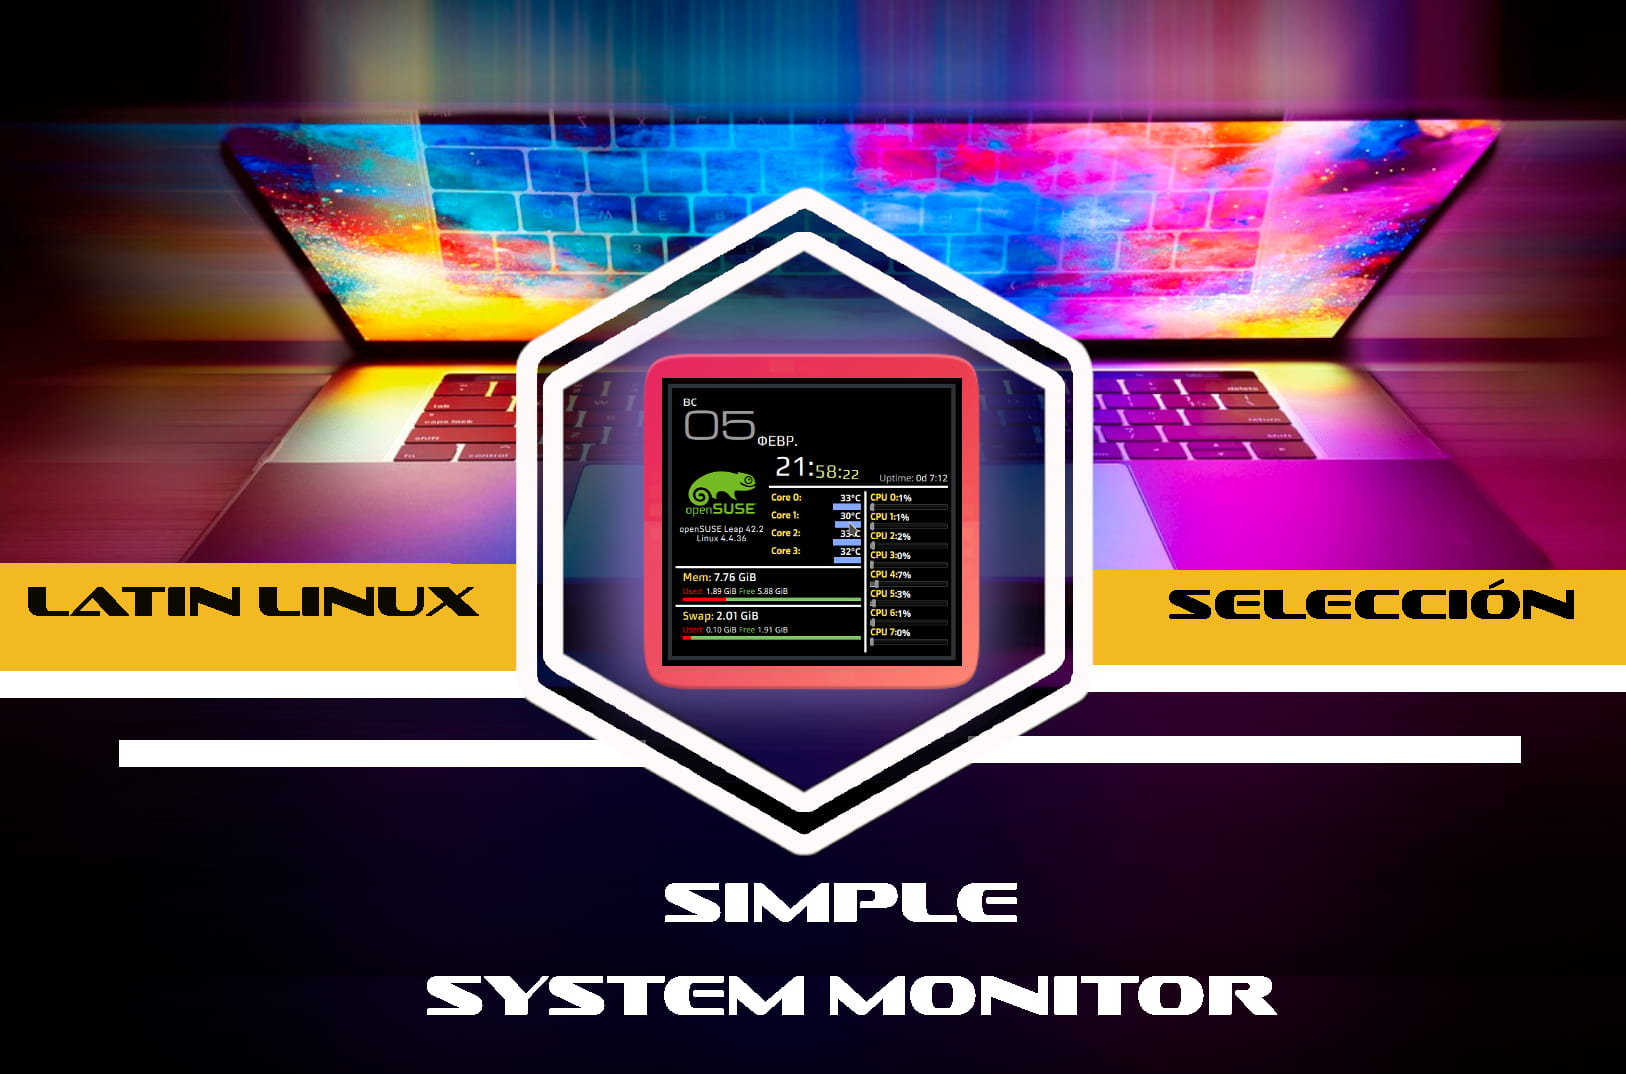 Simple System Monitor - Latin Linux